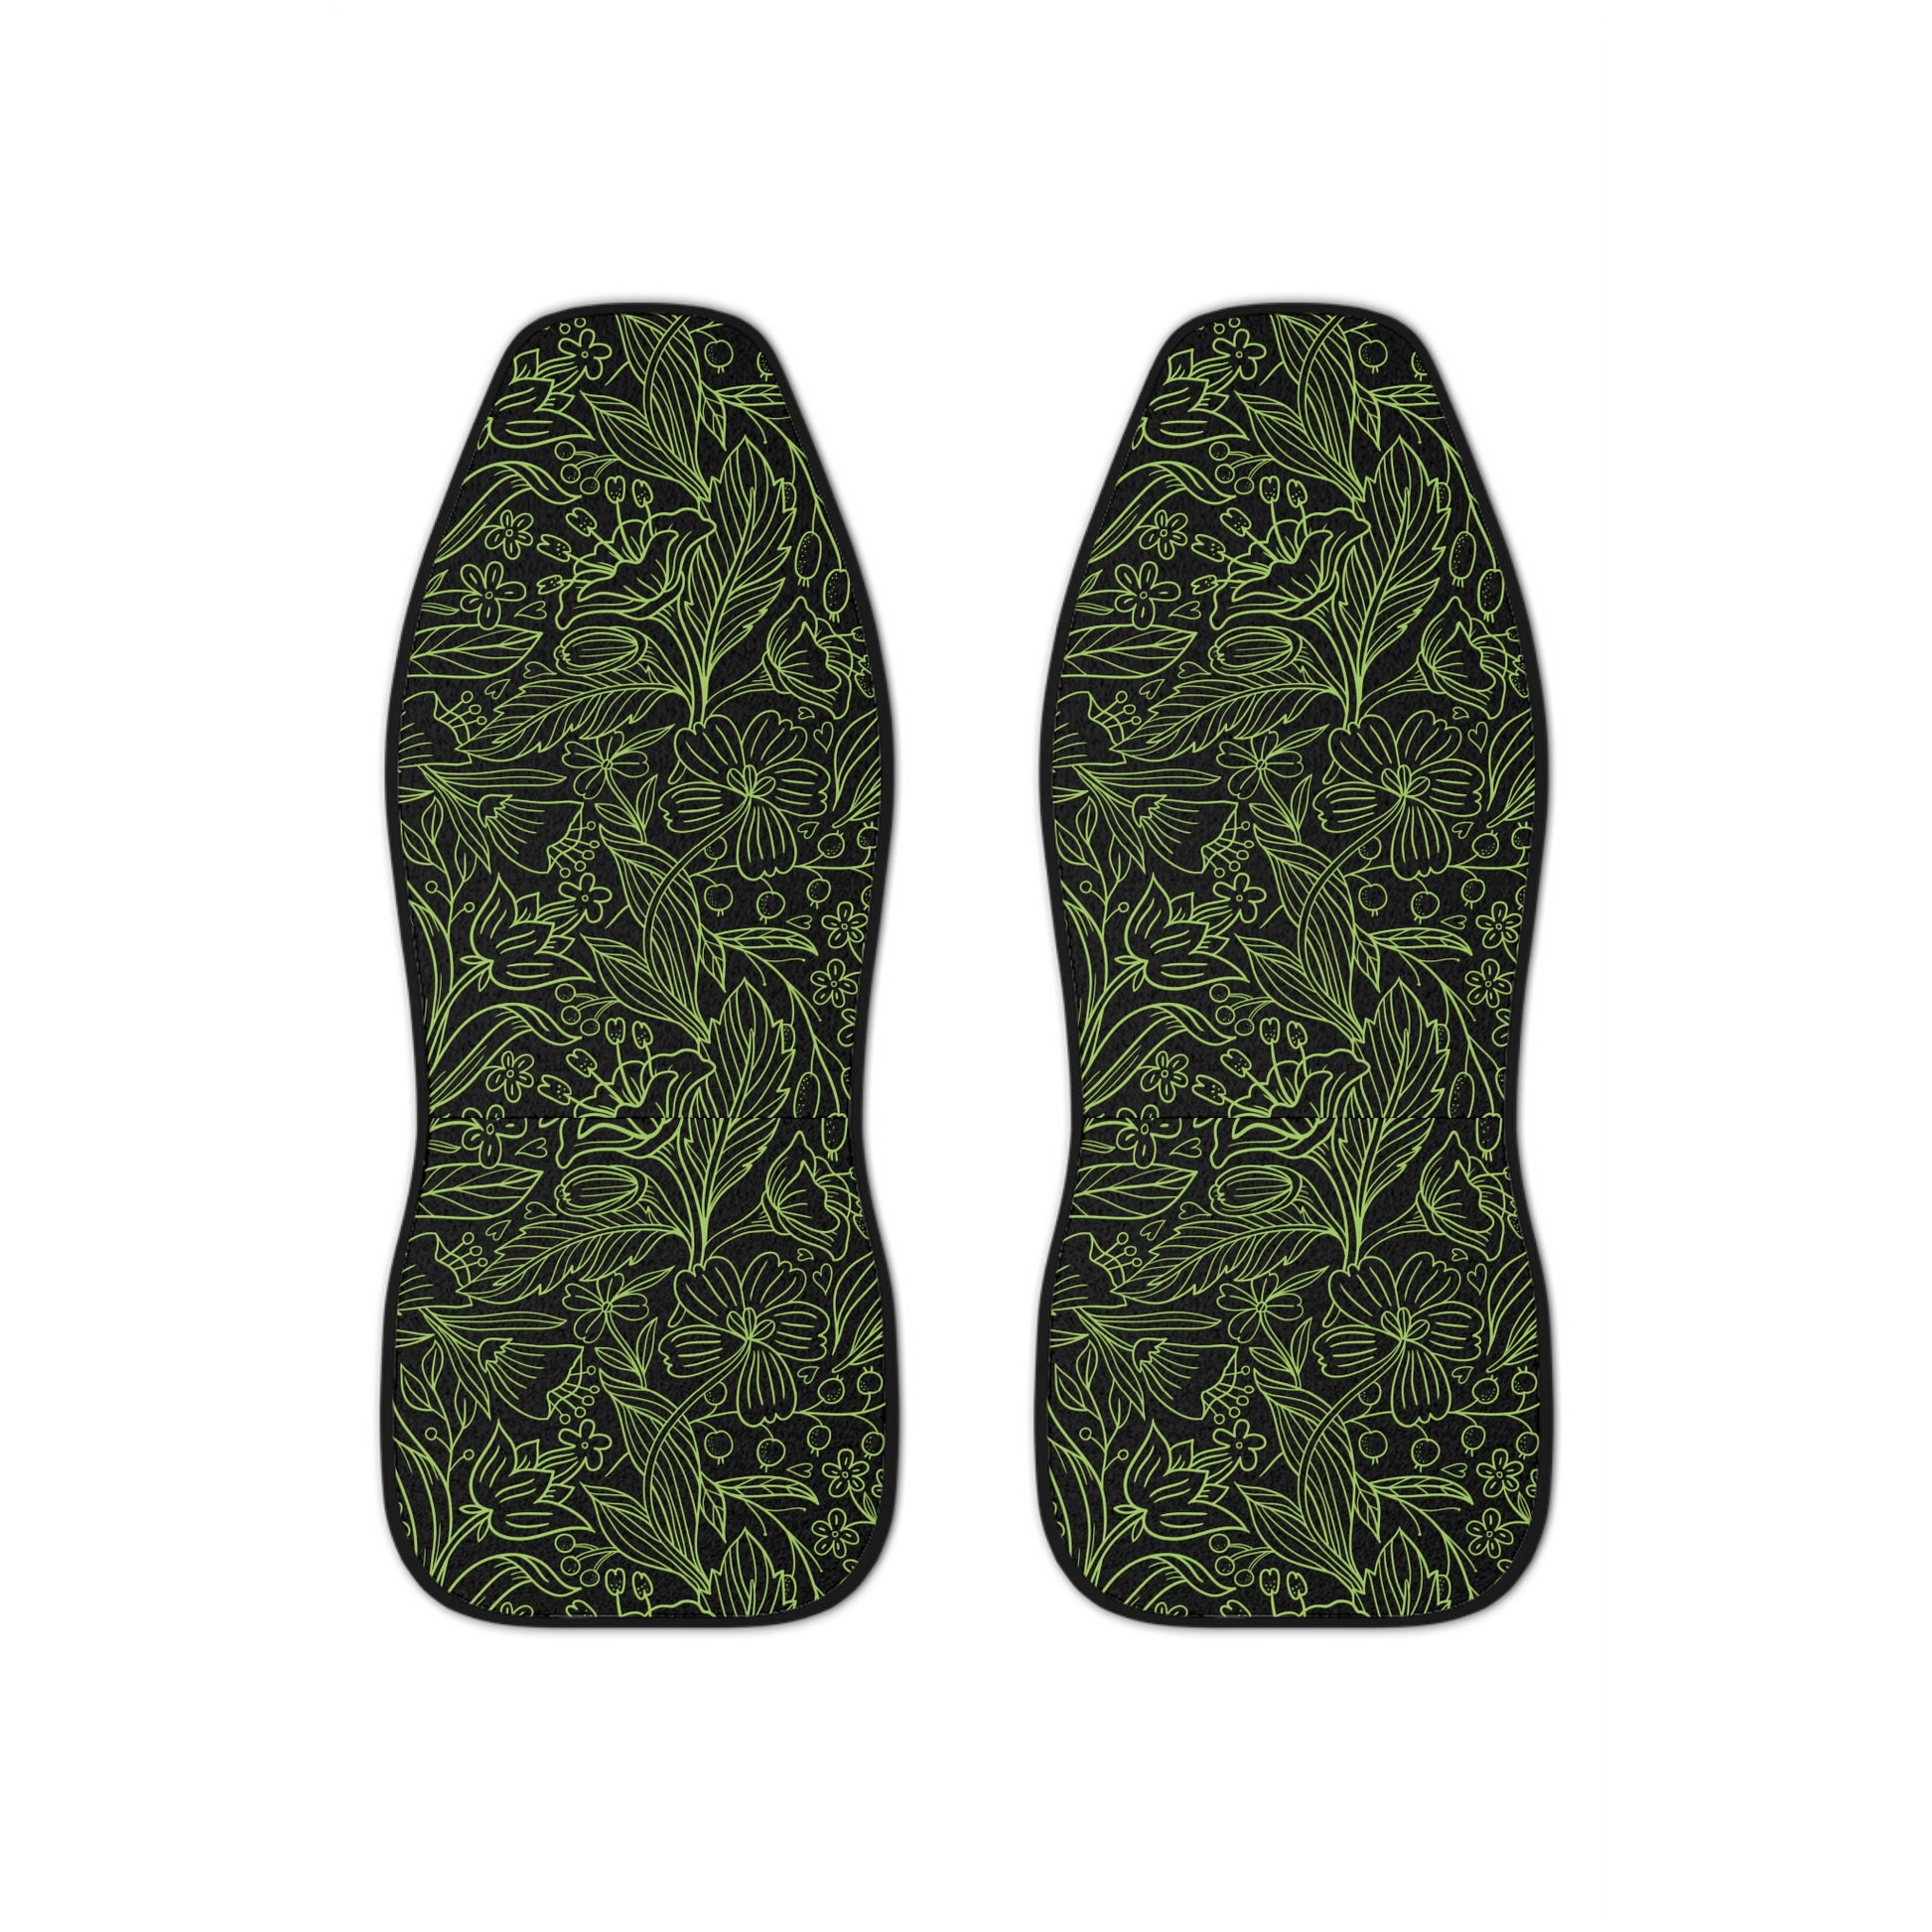 Green Floral Car Seat Cover